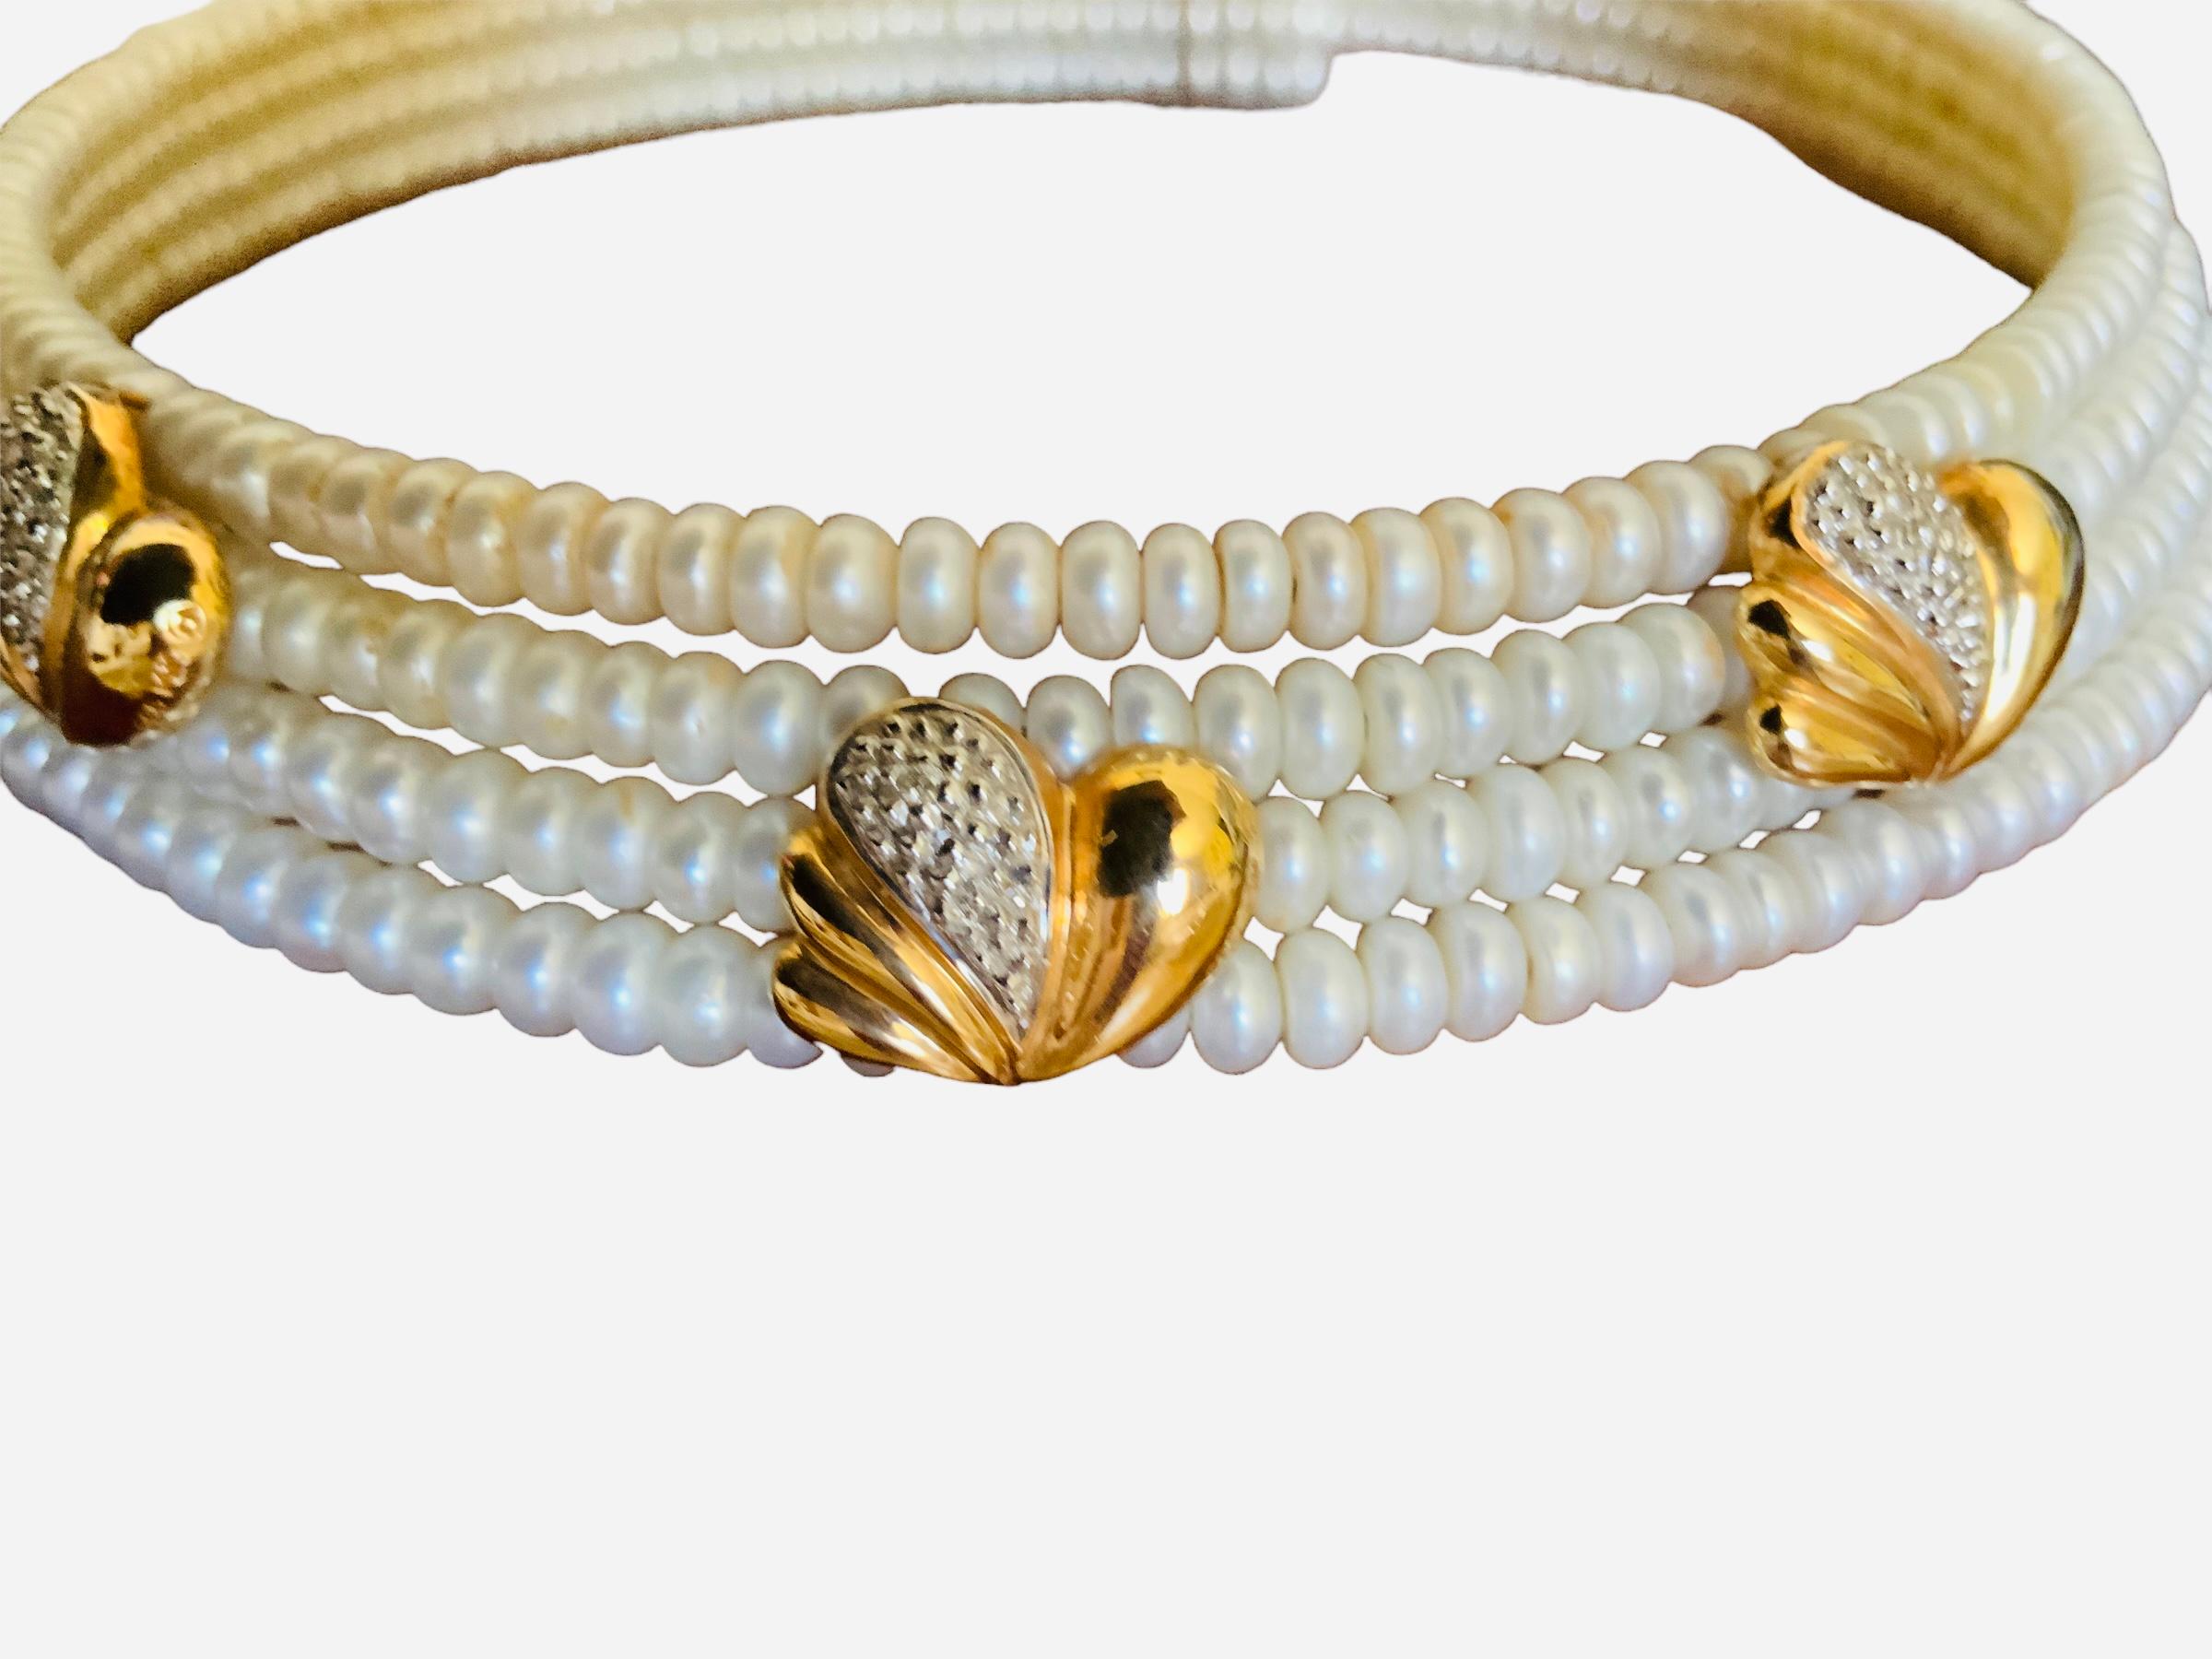 Women's 14k Gold and Pearls Set of Cuff Bracelet & Necklace